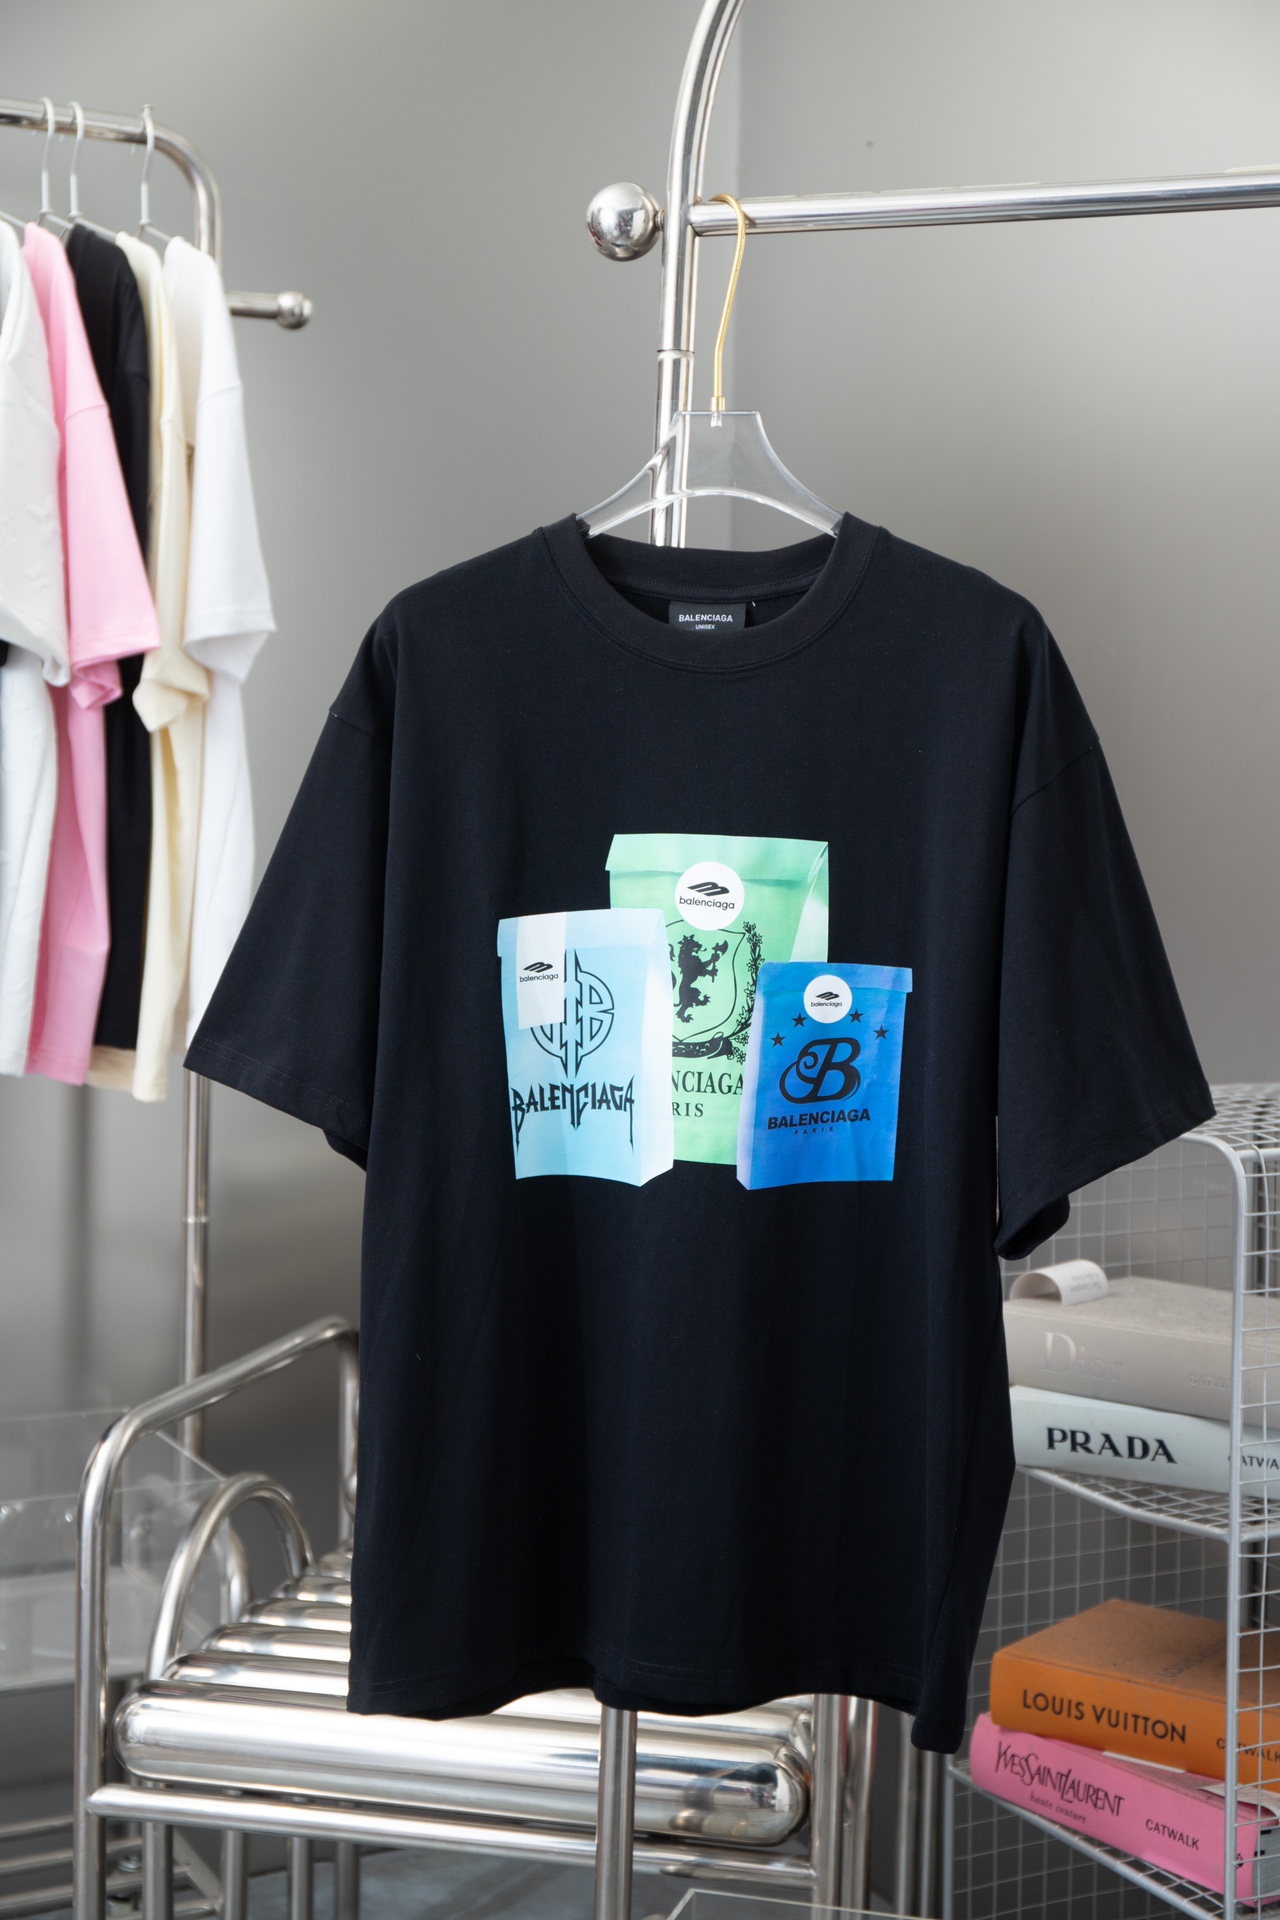 Balenciaga Clothing T-Shirt Best AAA+
 Unisex Cotton Spring Collection Fashion Short Sleeve